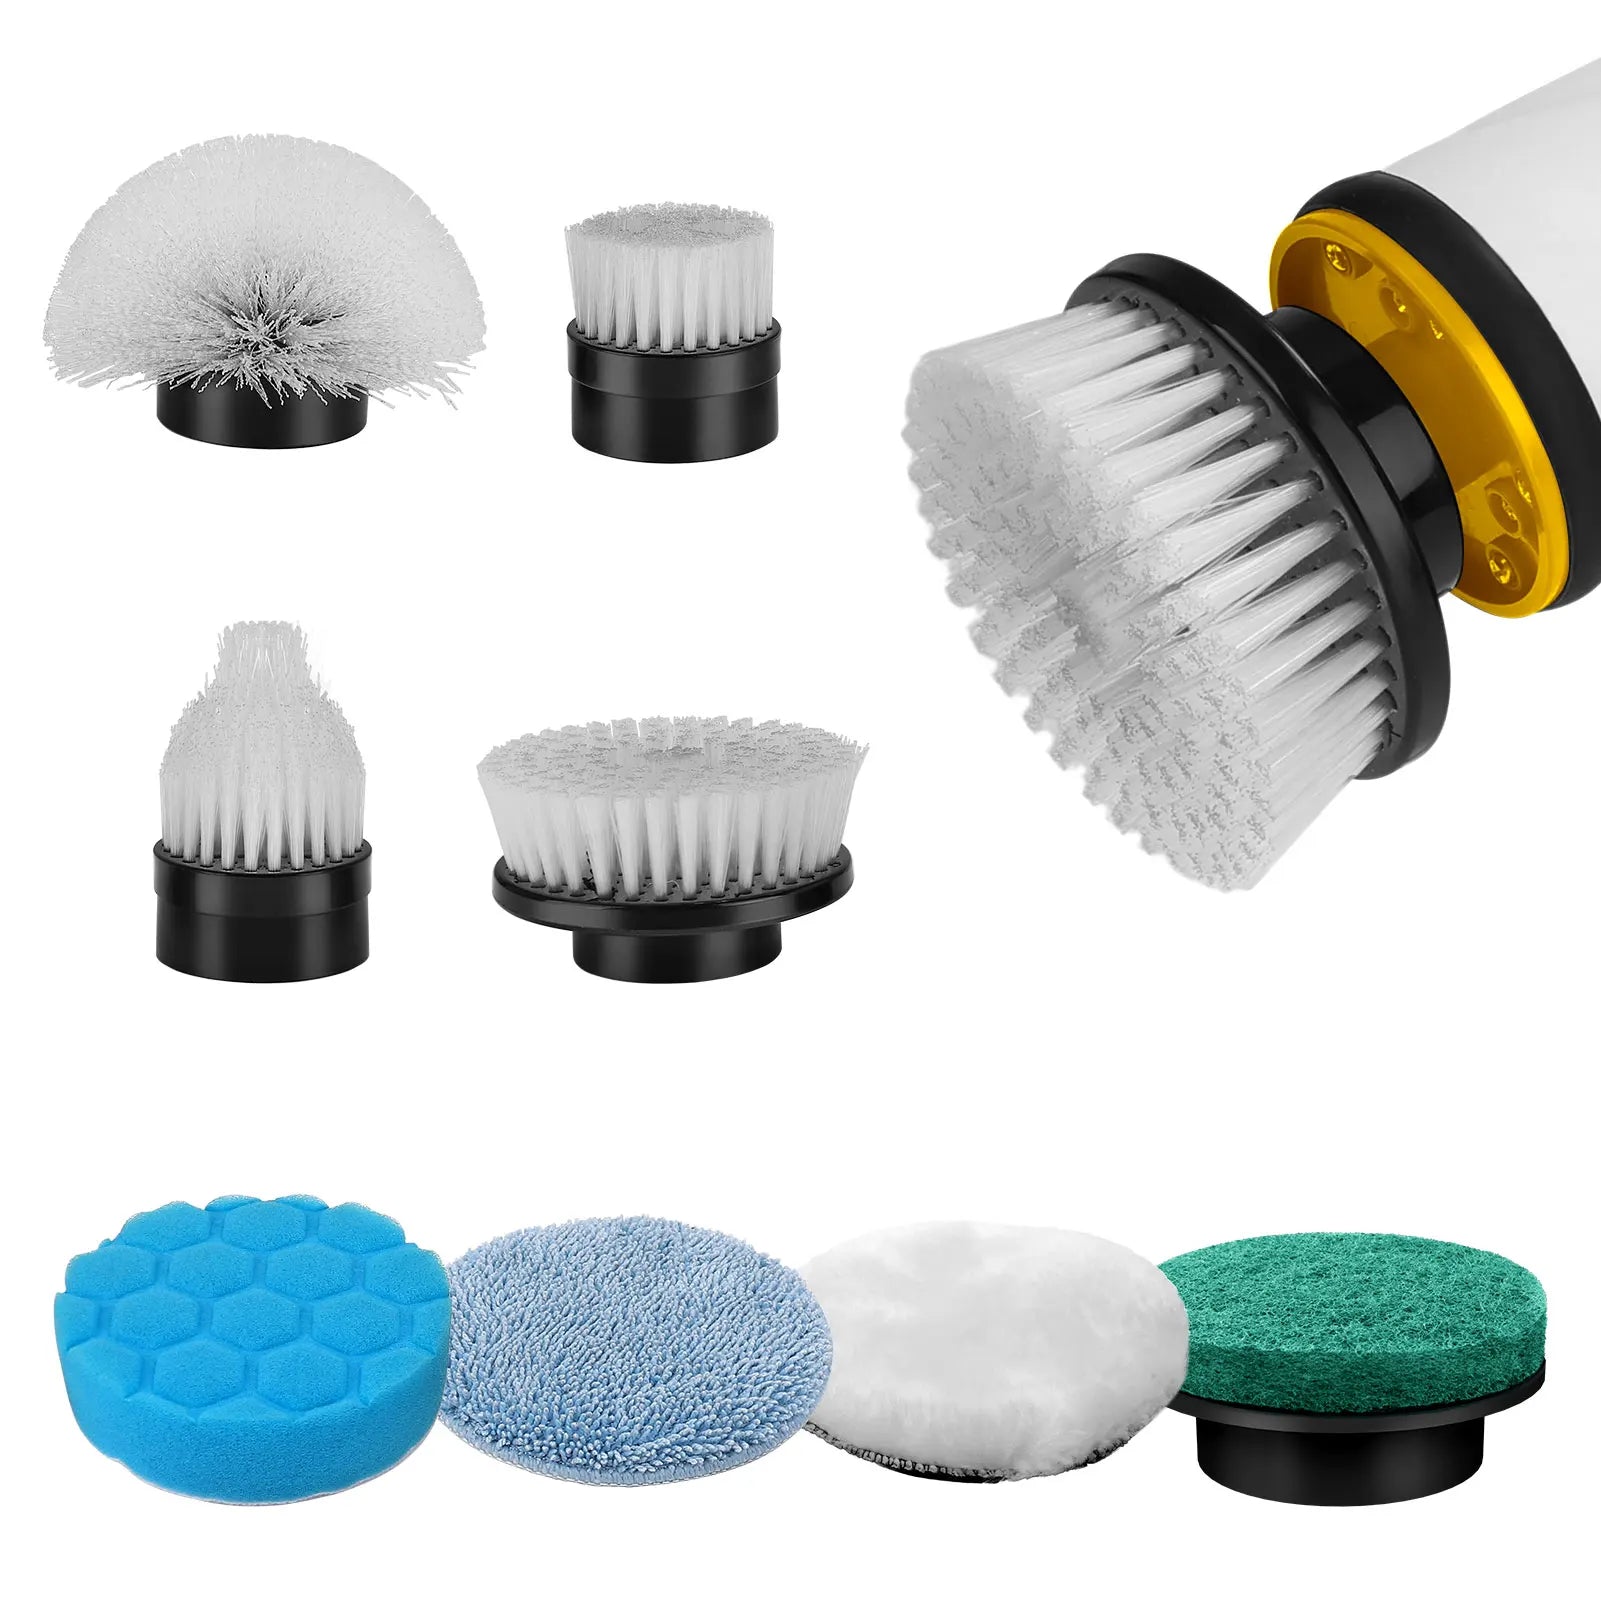 8 heads Cordless Electric spin scrubber heads replacement Handheld Power Cleaning Brush for Bathroom Floor Tool For our scrubber